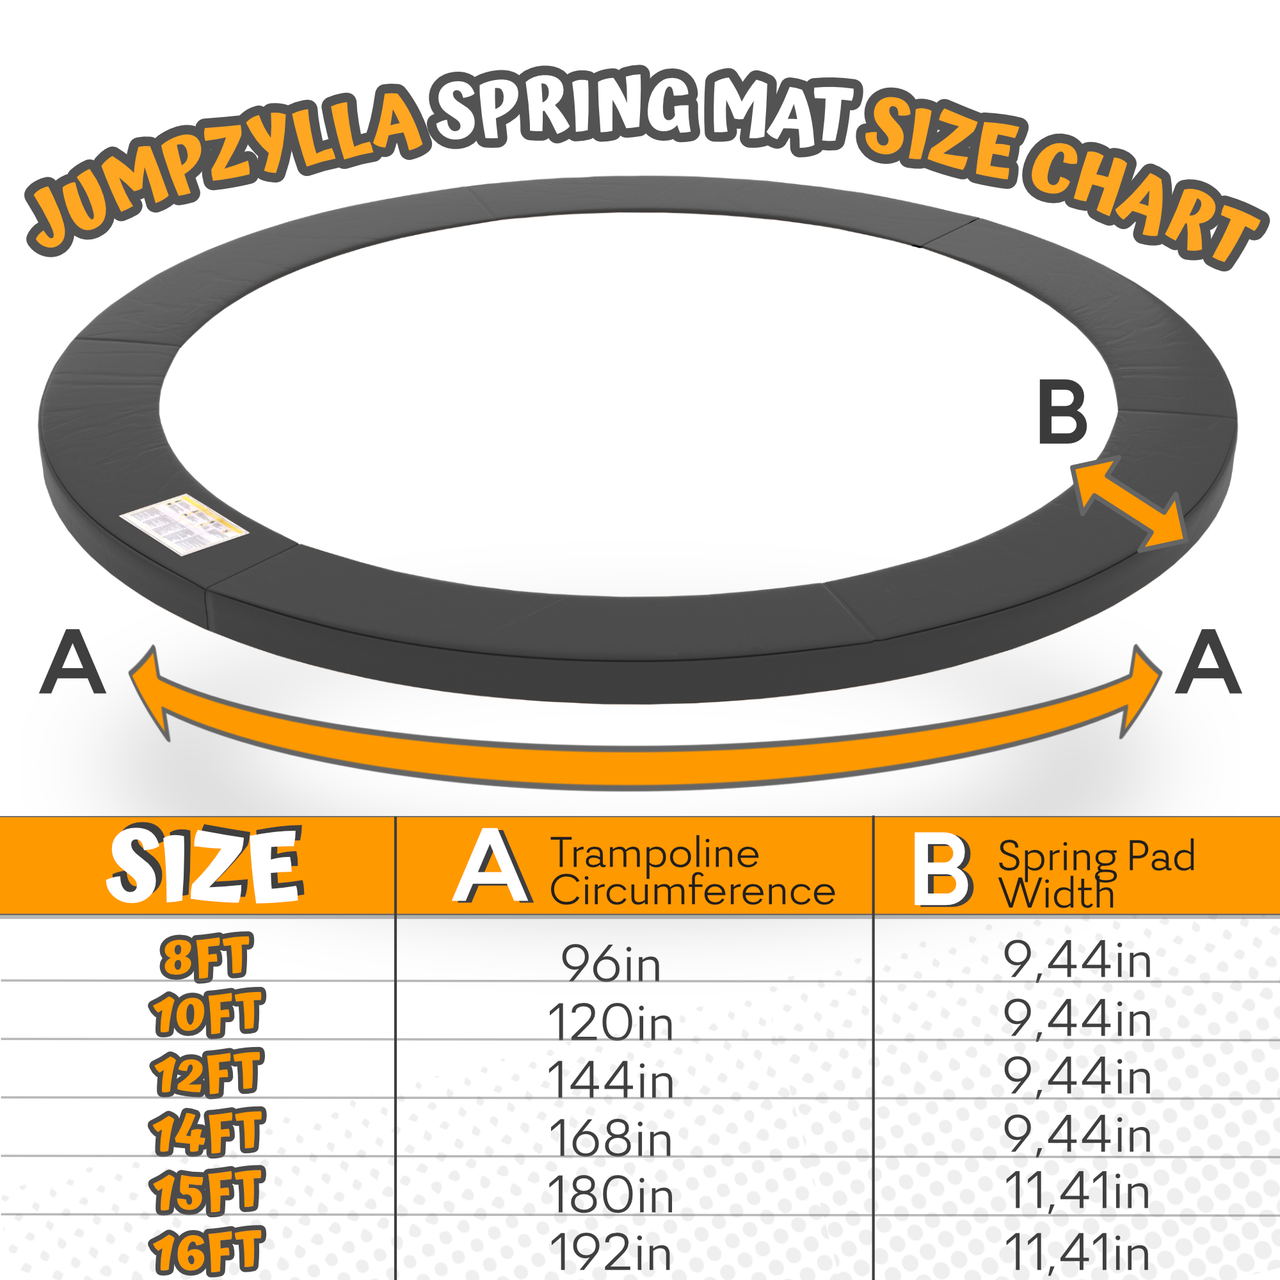 [NEW] Jumpzylla Double Sided Spring Cover Pads for 15FT Trampolines